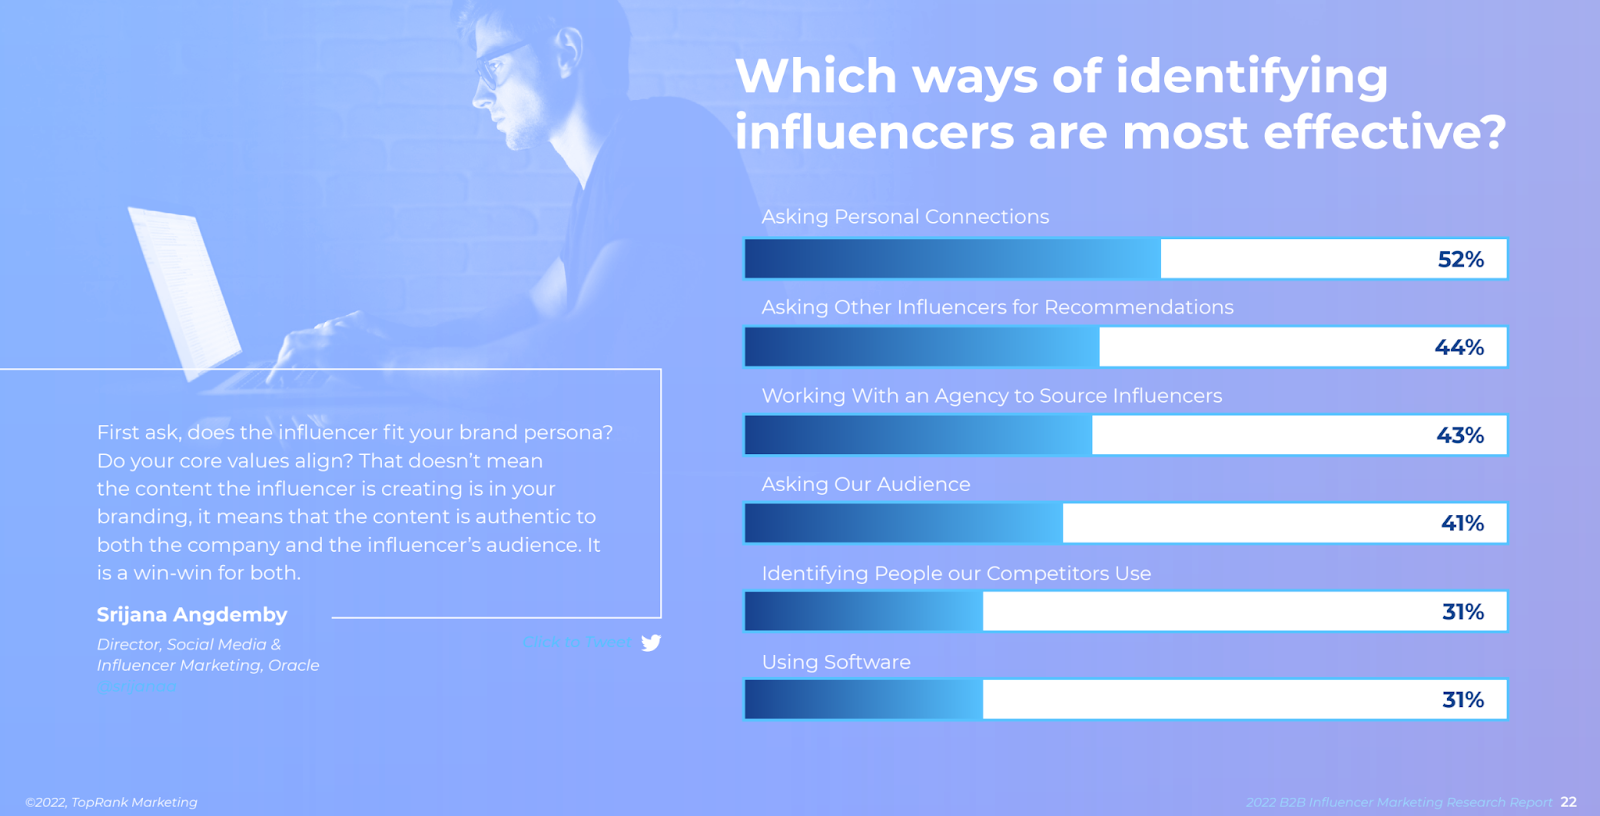 What You Need to Know About the 2022 B2B Influencer Marketing Research Report